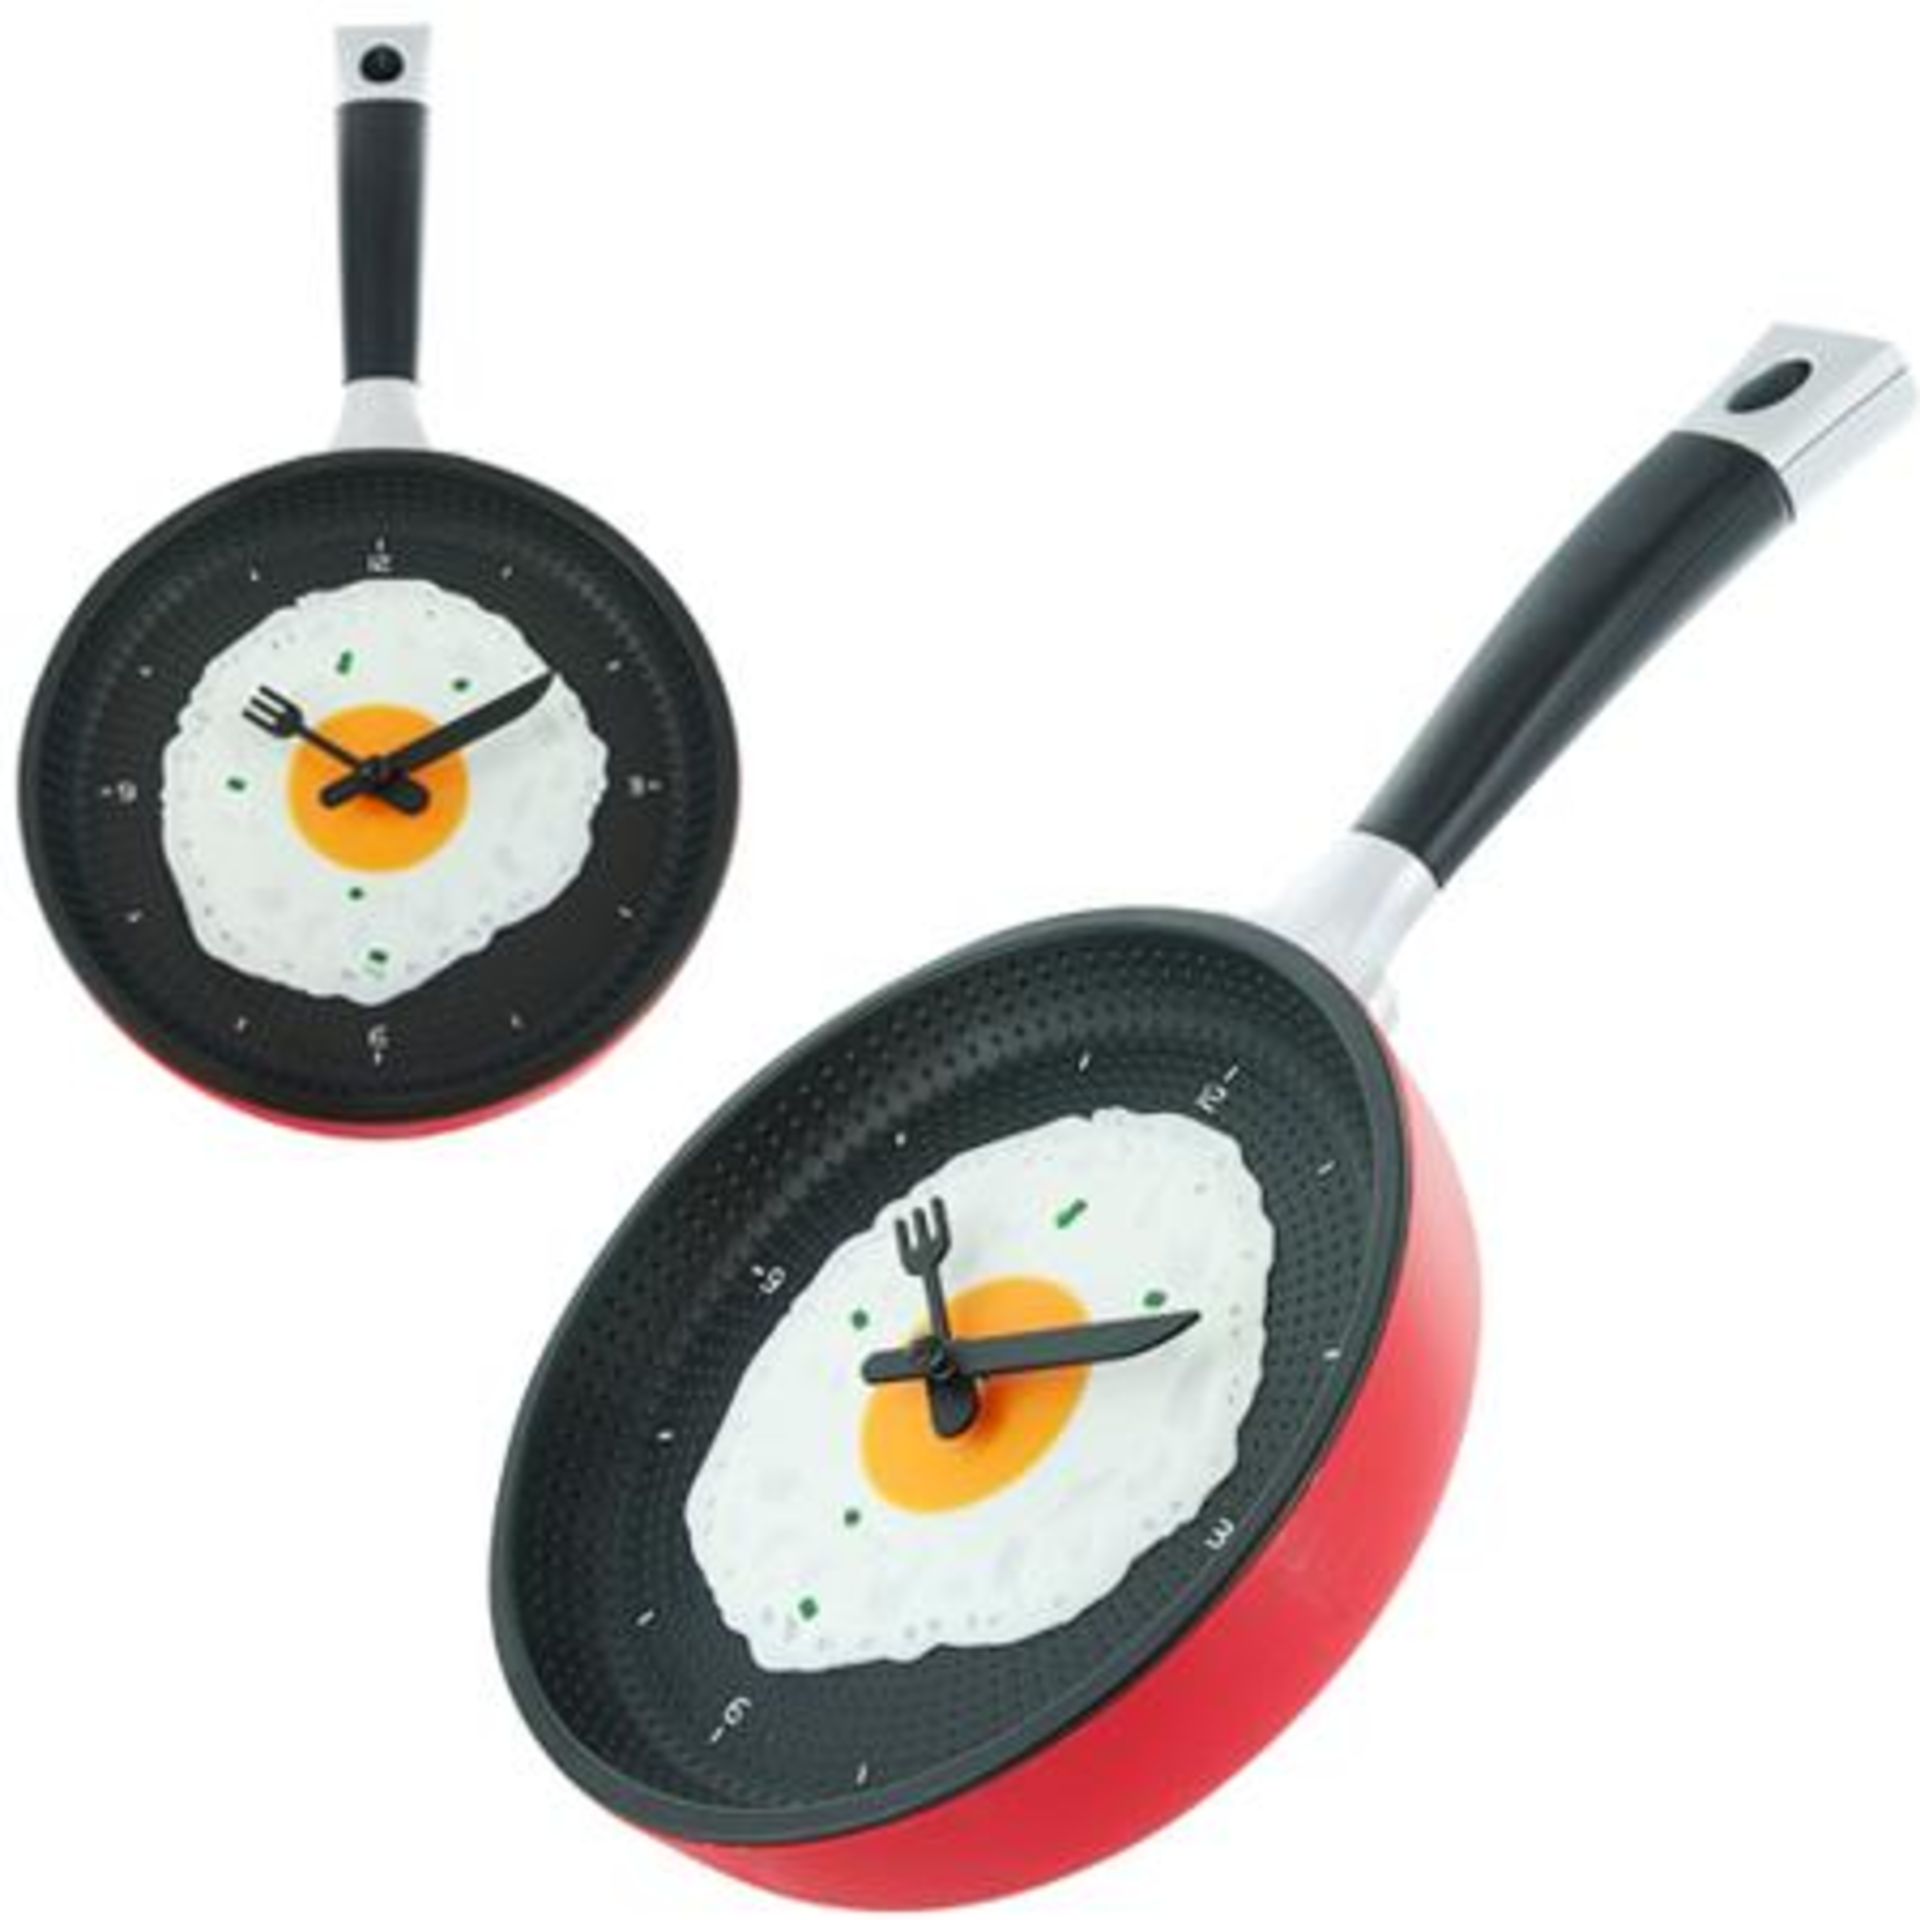 V Brand New Frying Pan Wall Clock (Colour may vary) X 2 YOUR BID PRICE TO BE MULTIPLIED BY TWO